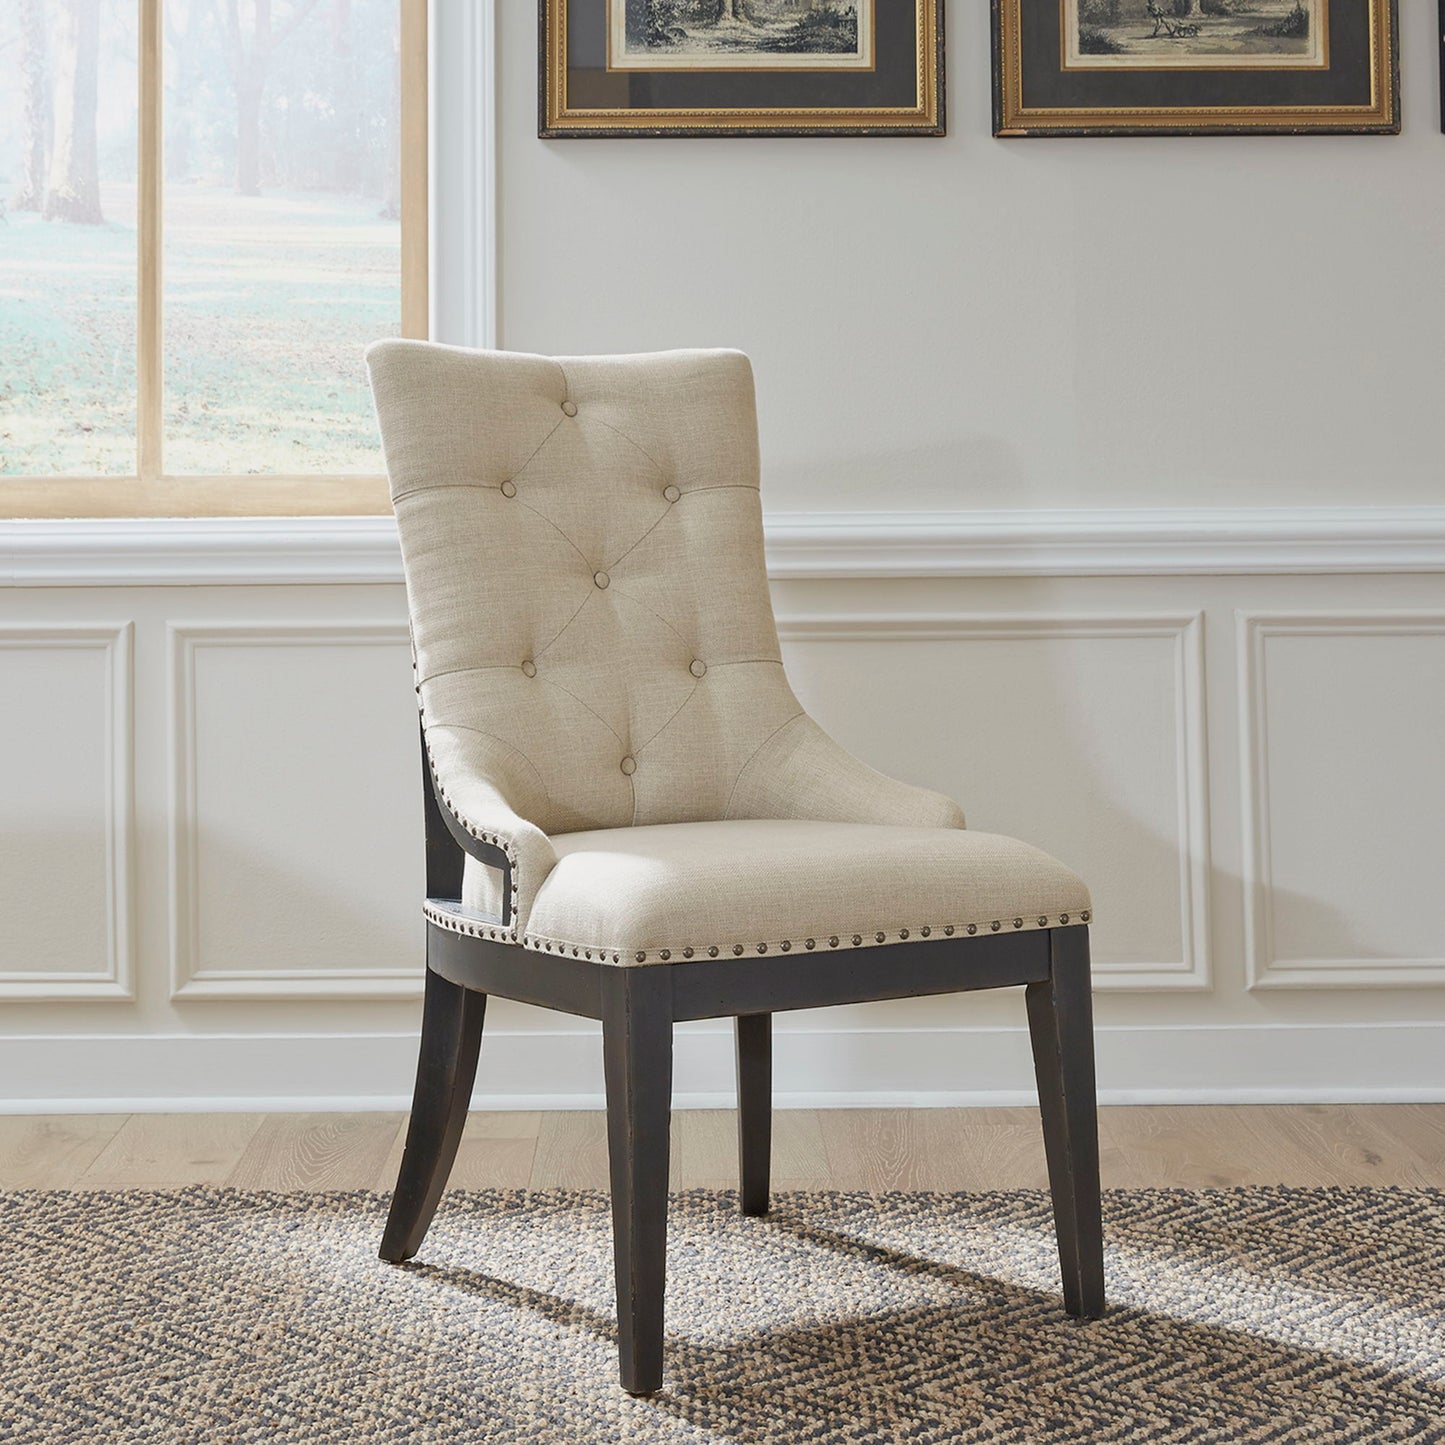 Americana Farmhouse - Upholstered Shelter Side Chair